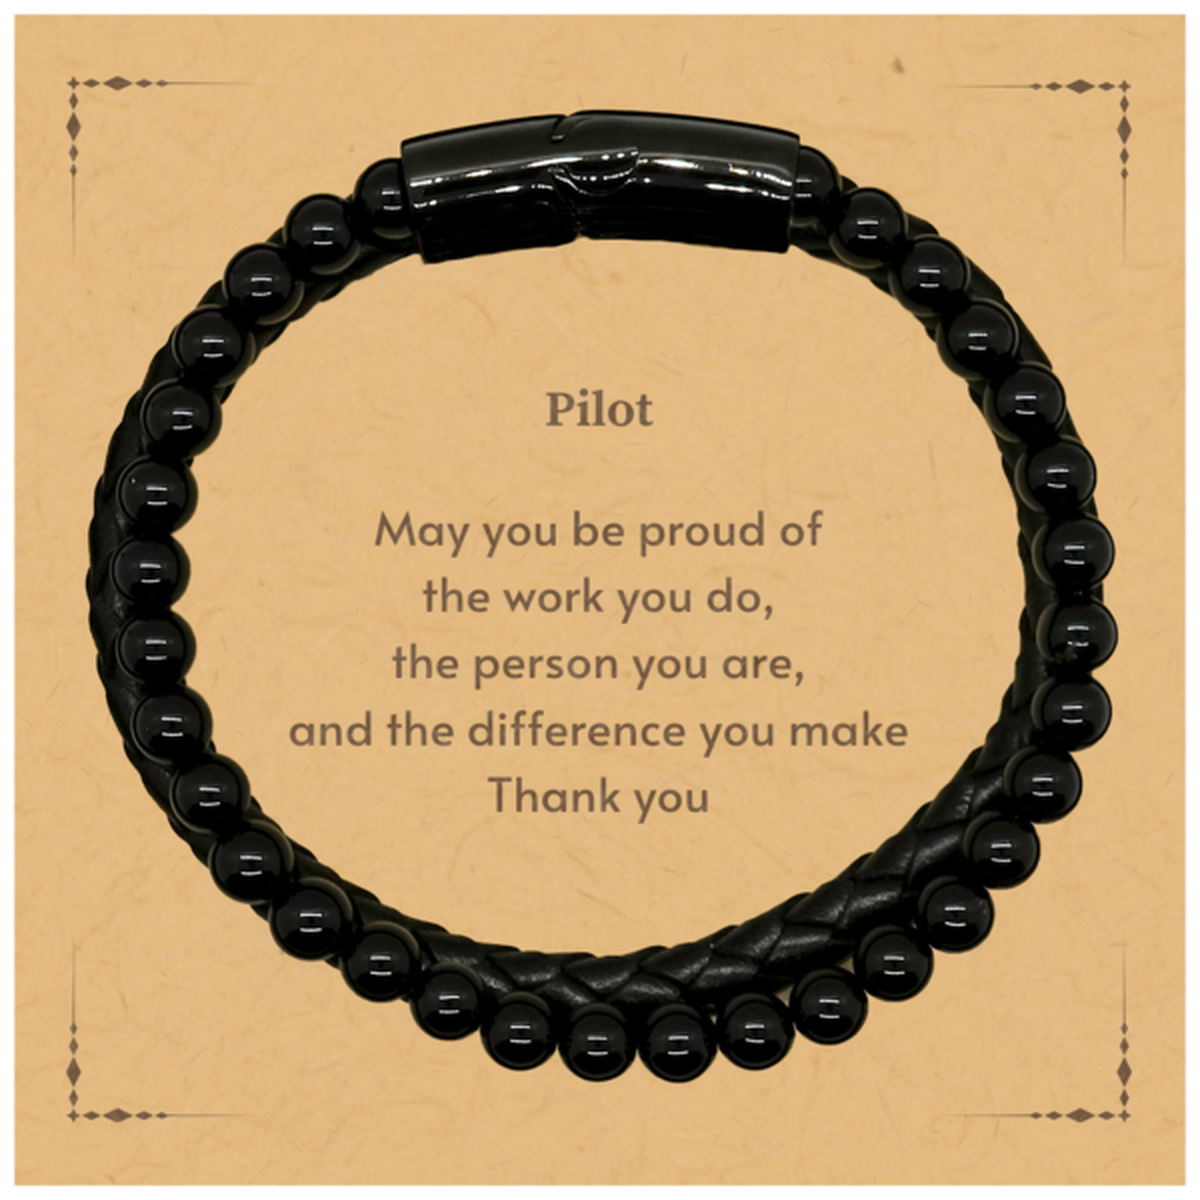 Heartwarming Stone Leather Bracelets Retirement Coworkers Gifts for Pilot, Pilot May You be proud of the work you do, the person you are Gifts for Boss Men Women Friends